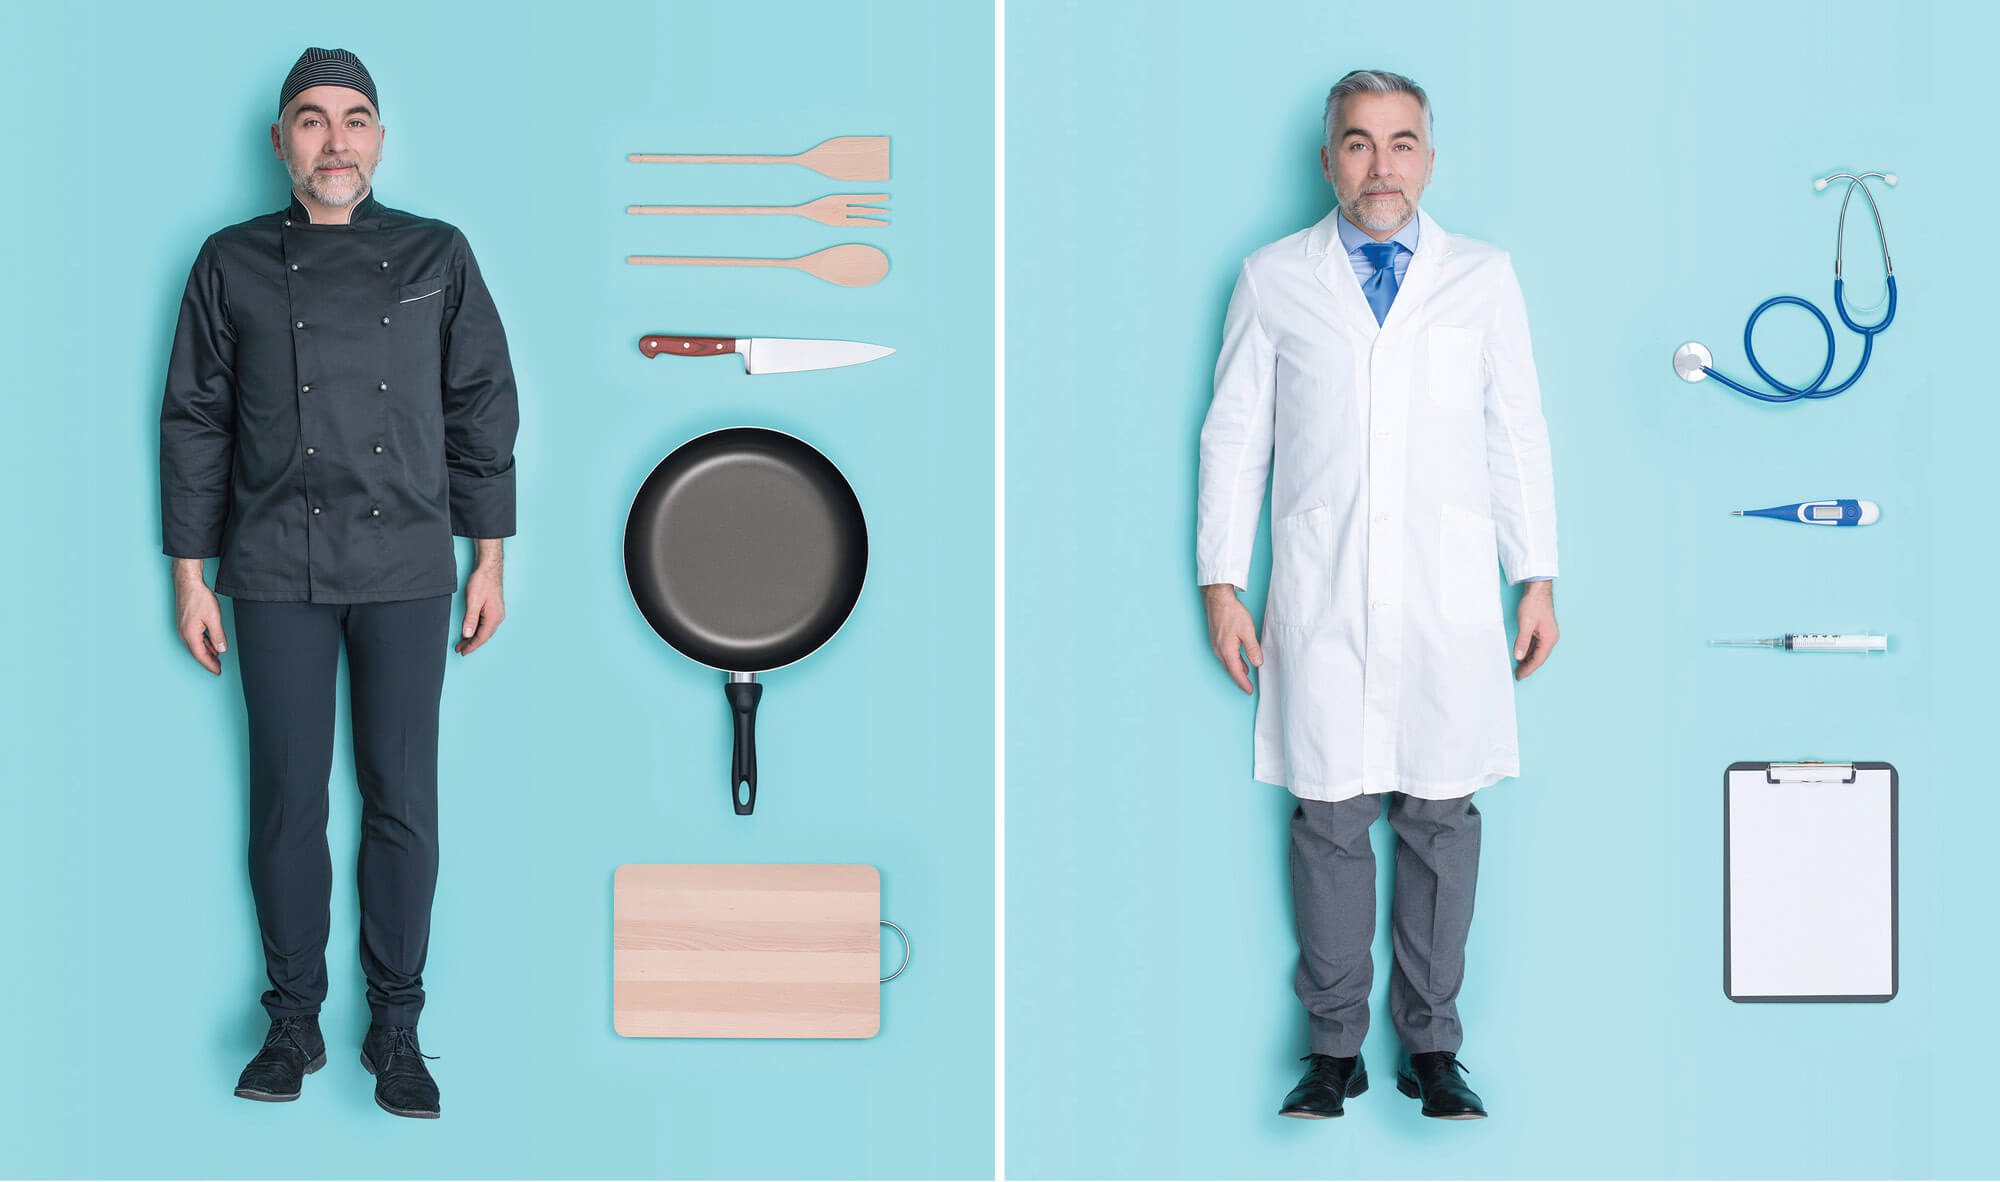 Man in first block is dressed as chef and in the second block as a doctor. Credit: istock.